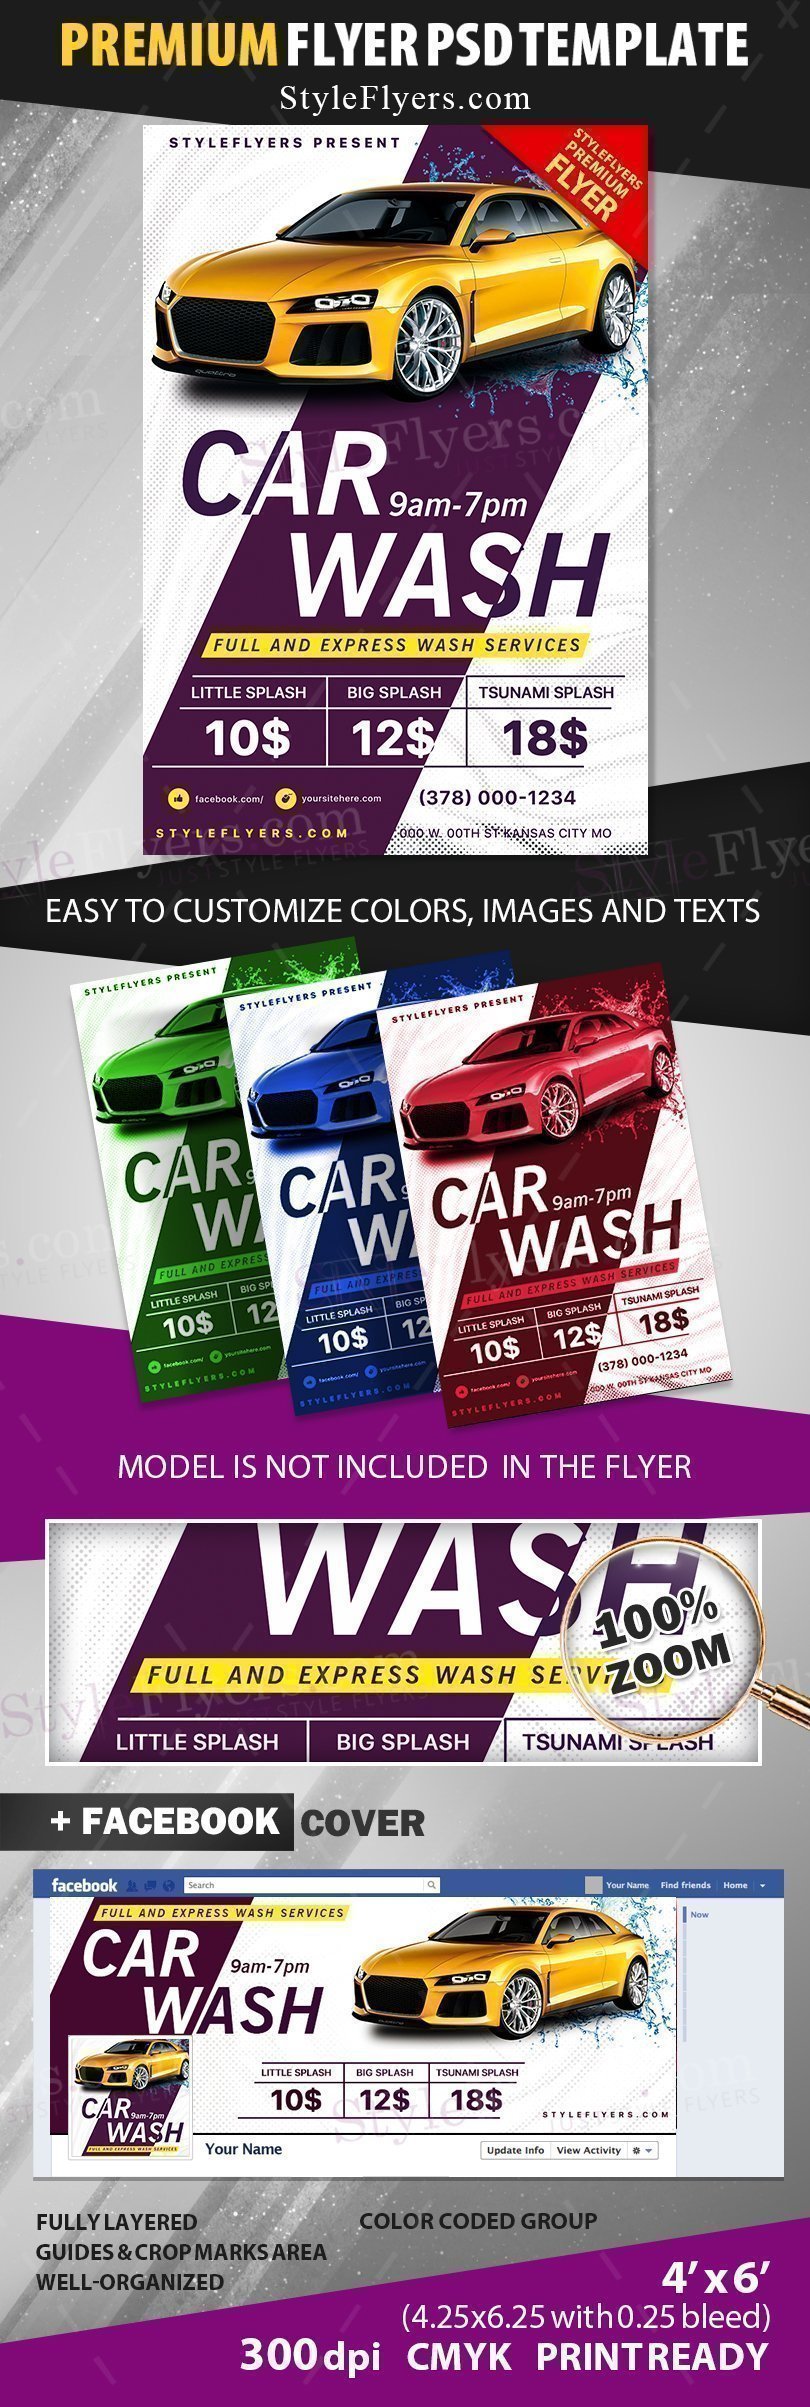 preview_car wash_psd_flyer